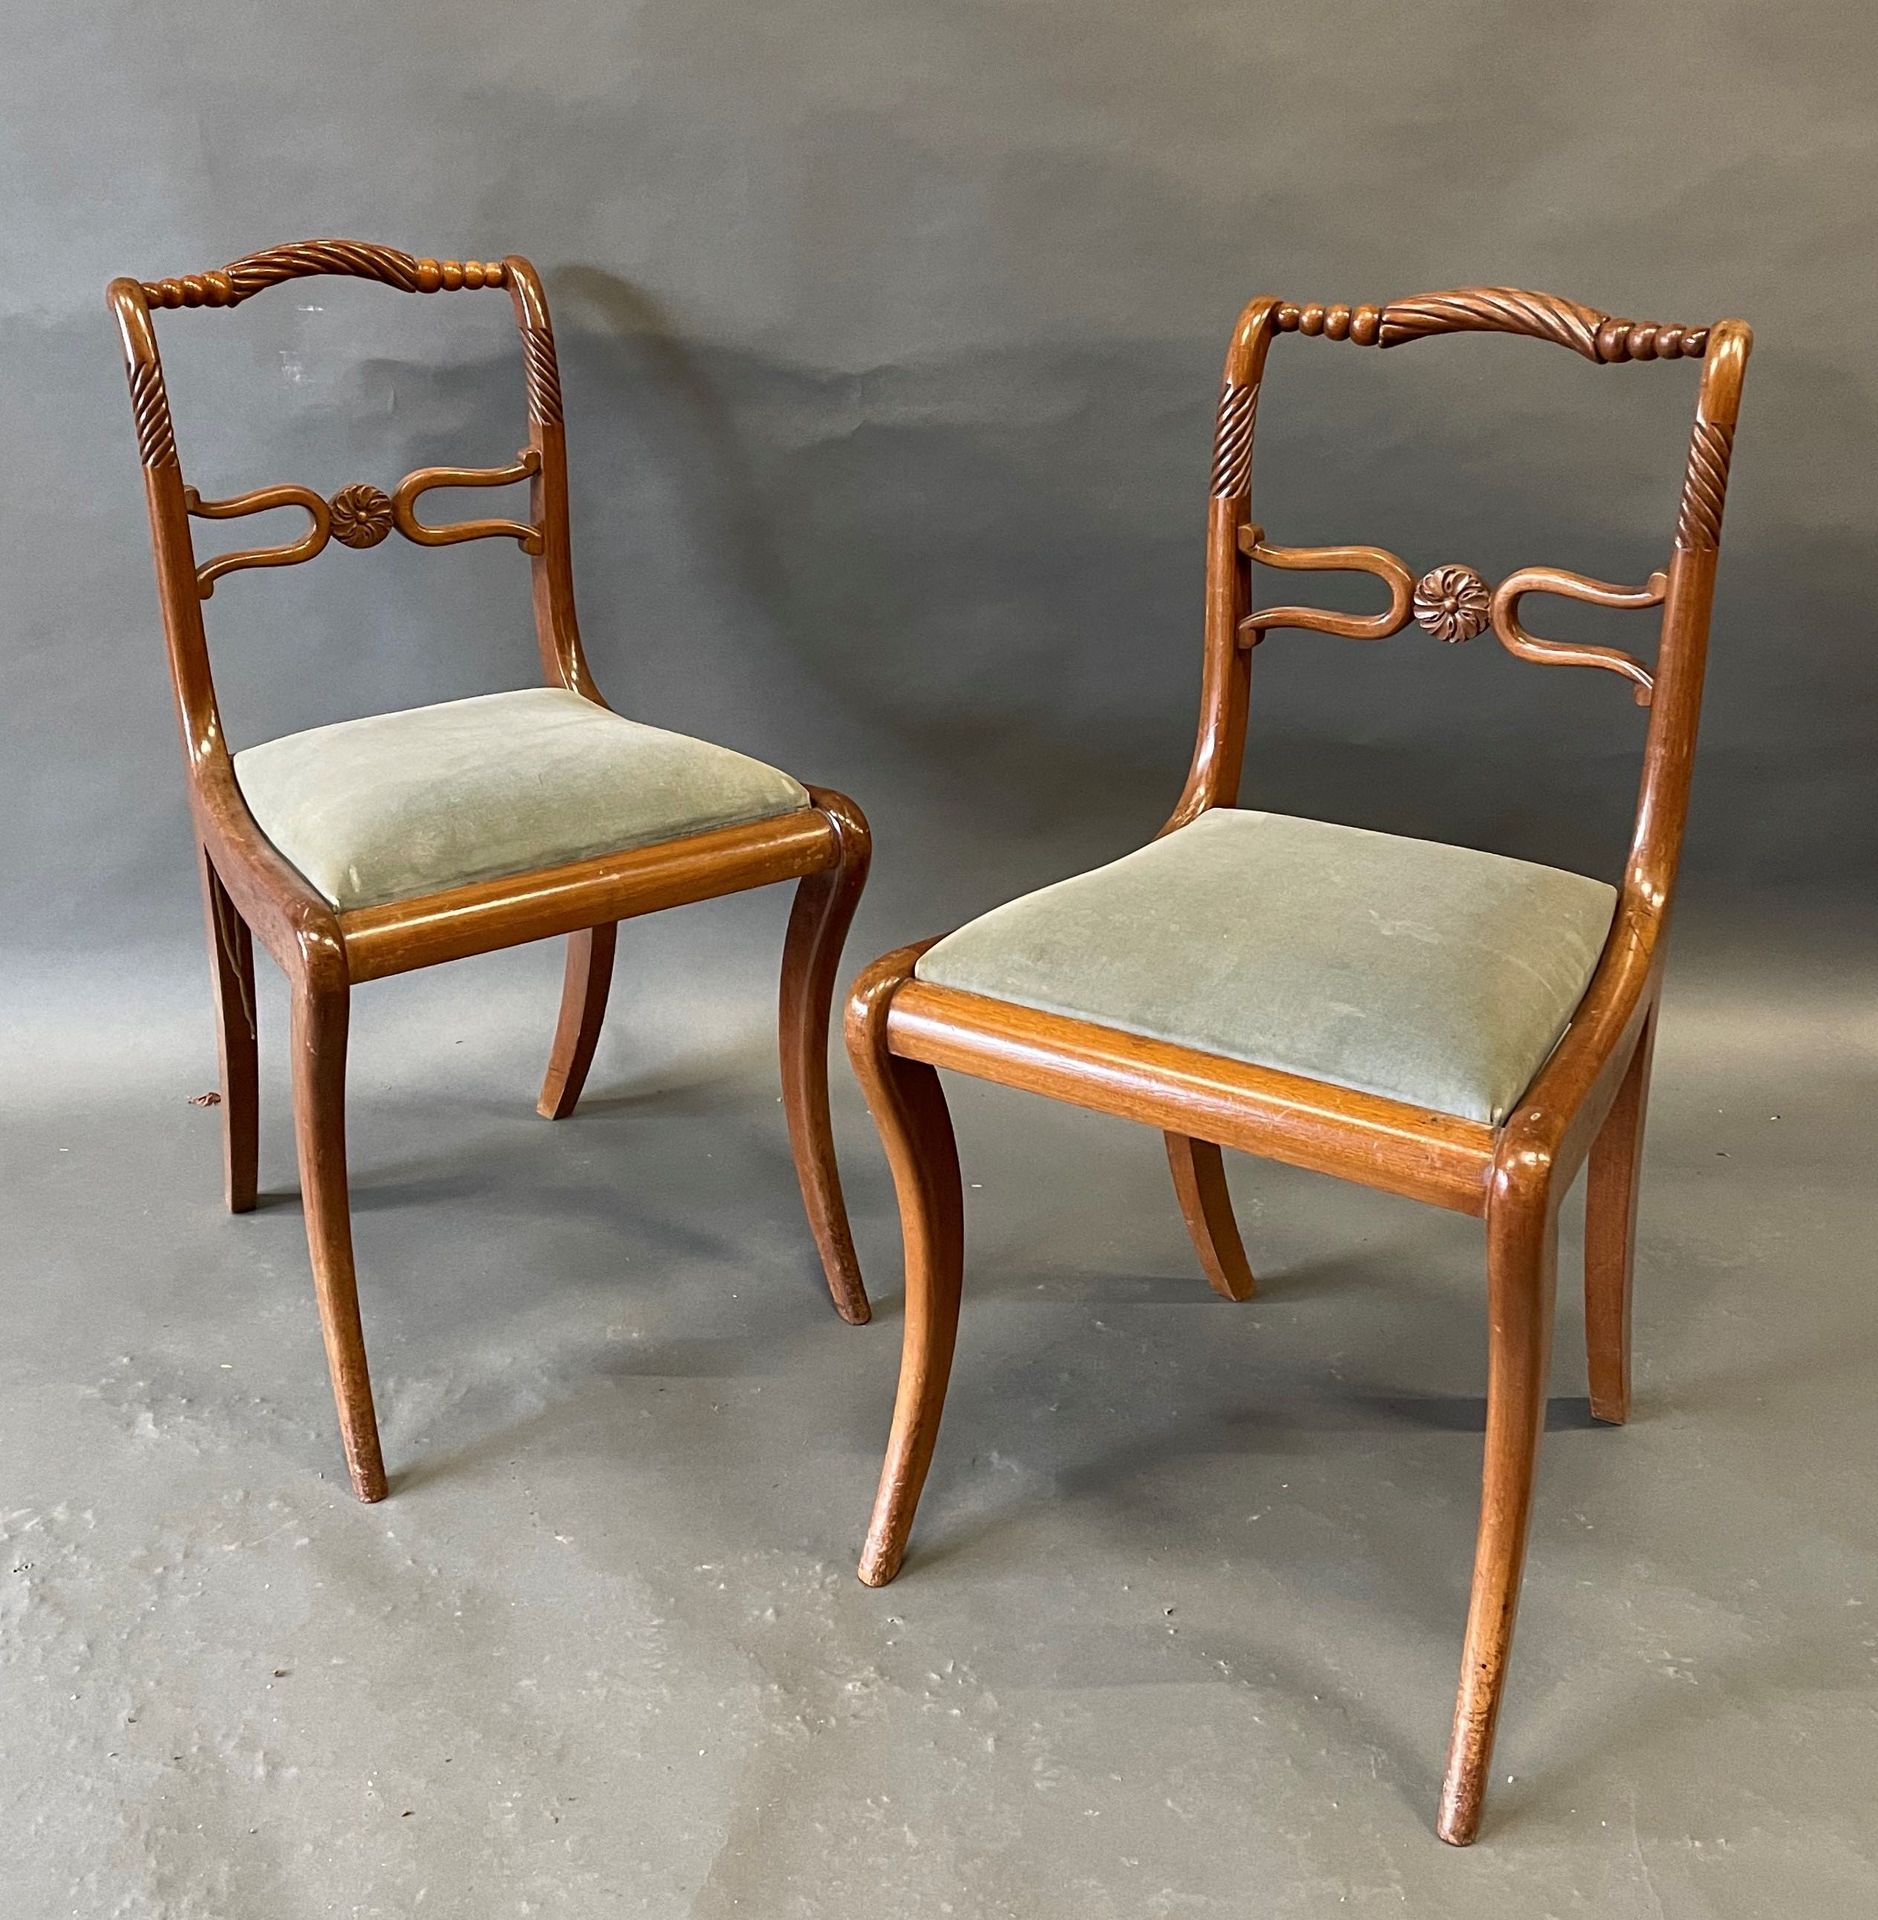 Null Pair of natural wood chairs with twisted bar backs. 86 x 46 x 41 cm